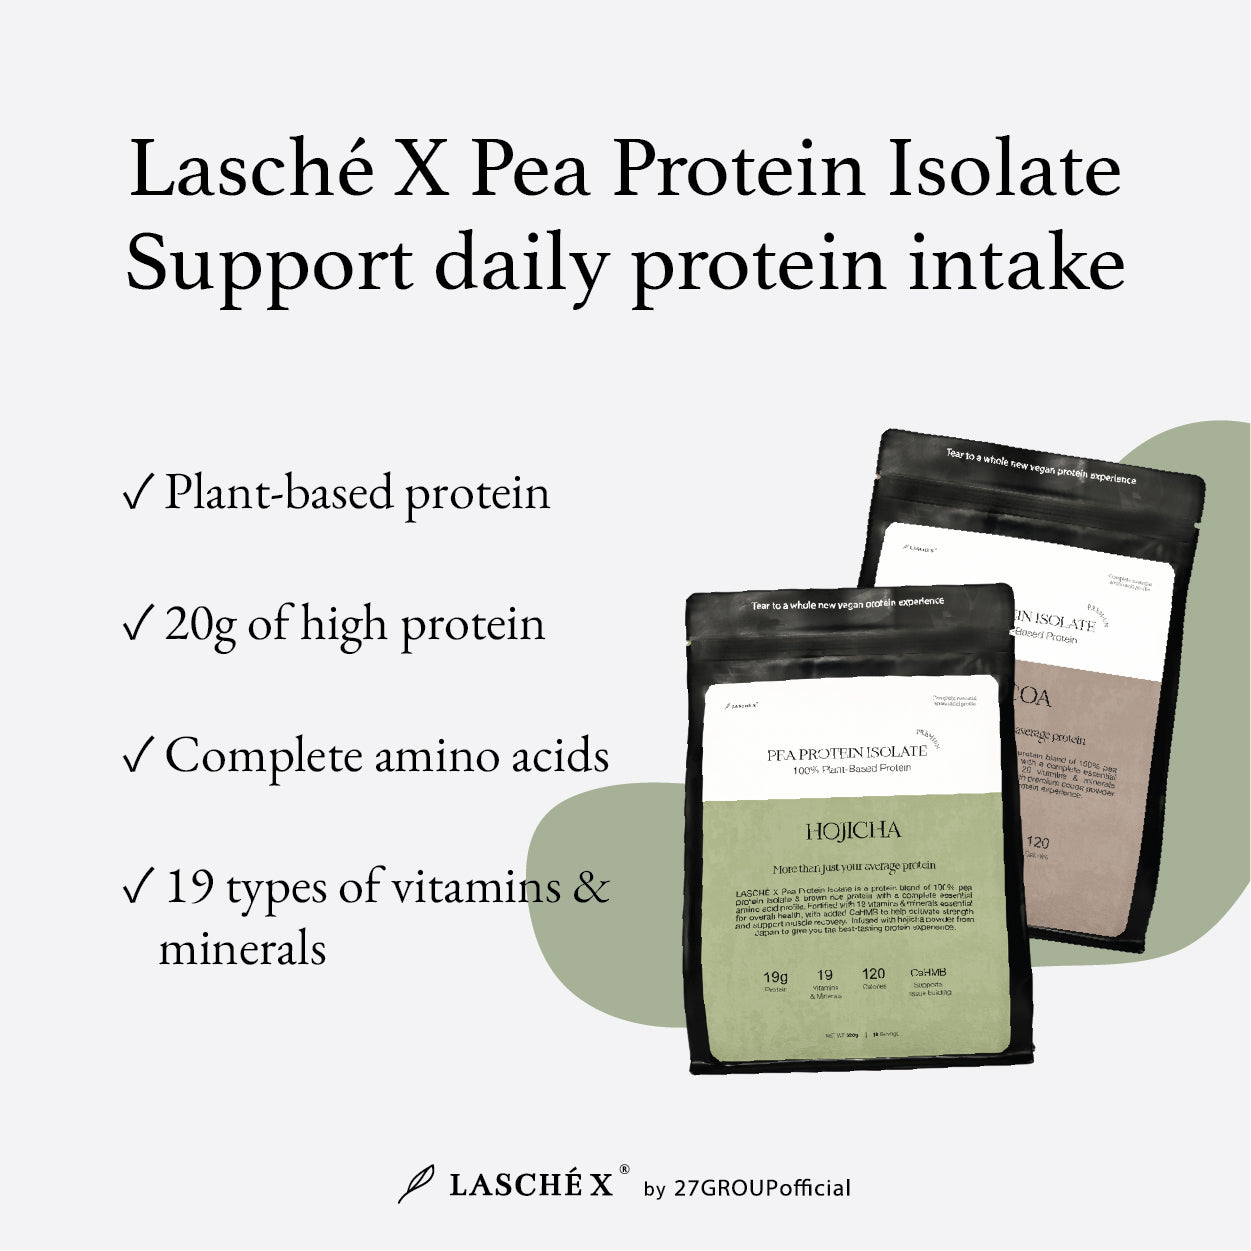 Lasché X protein powder supports daily intake